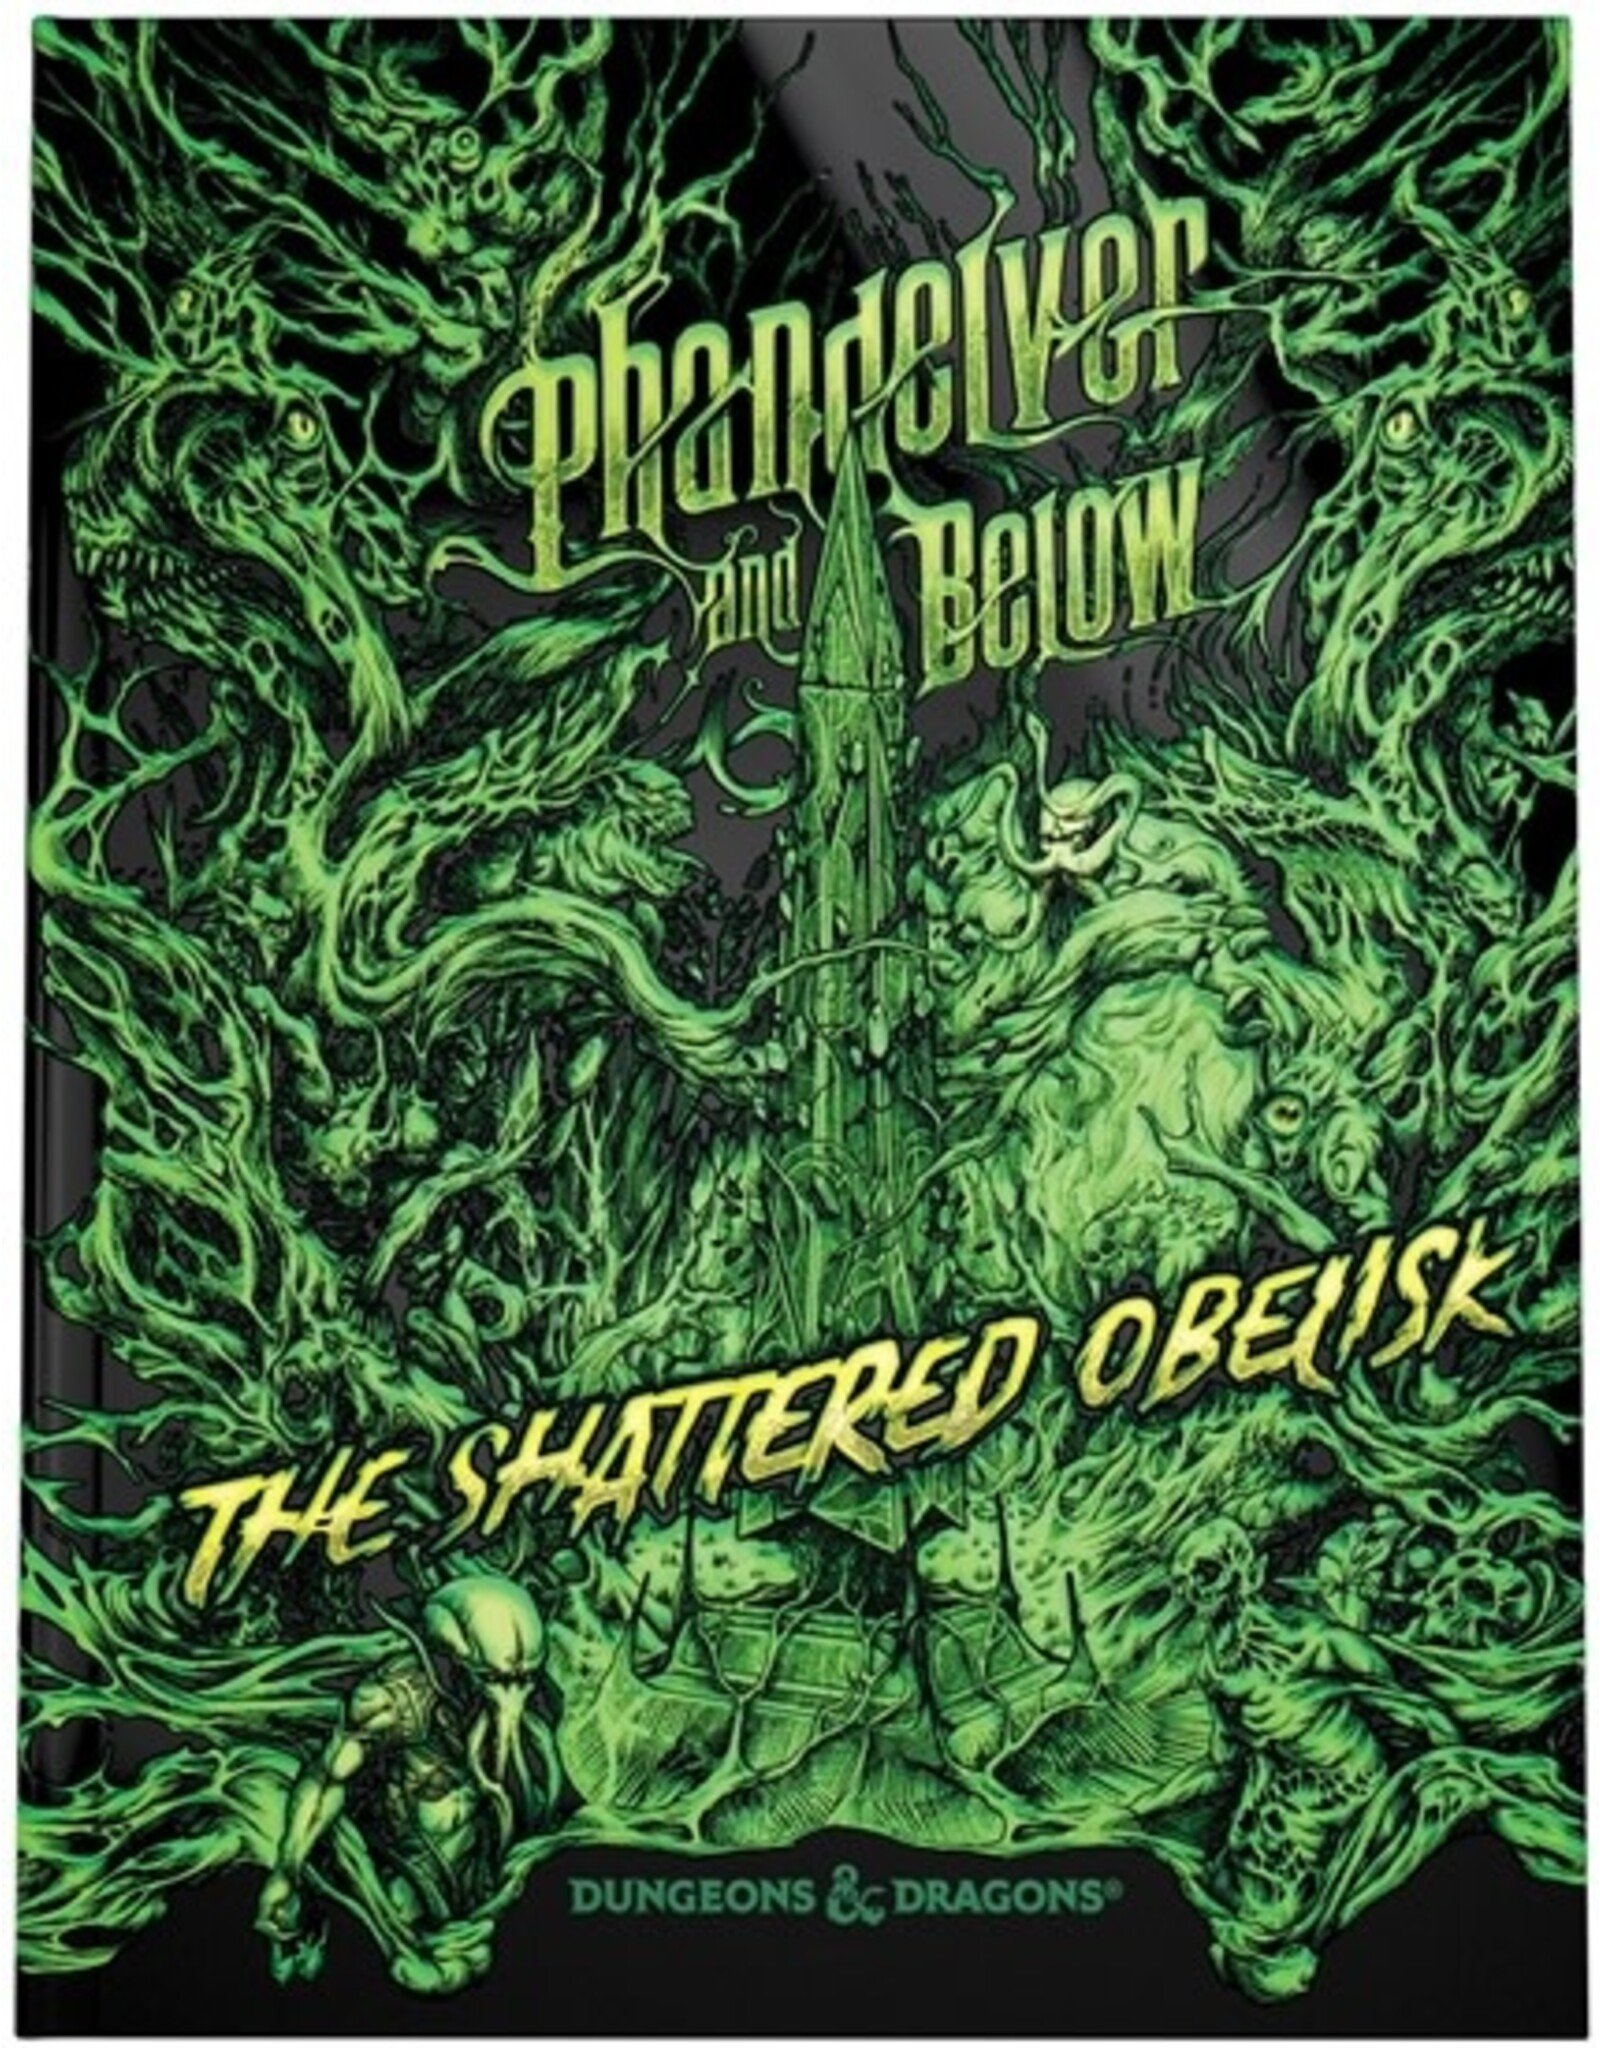 Dungeons & Dragons Phandelver and Below - The Shattered Obelisk Hobby Cover (HC)